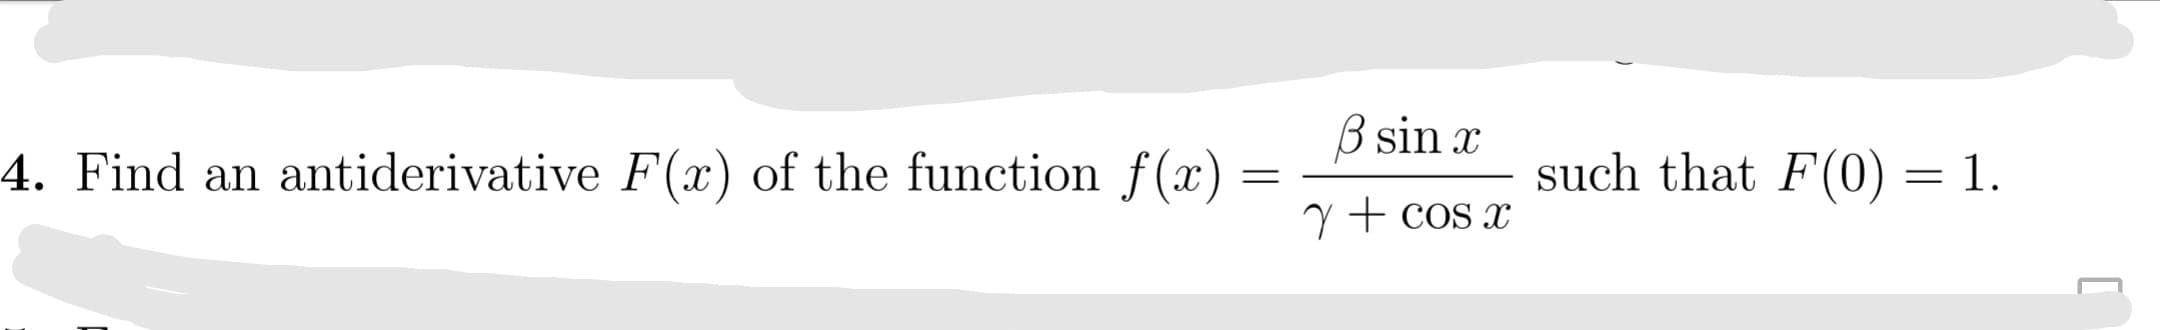 B sin x
. Find an antiderivative F(x) of the function f(x)
such that F(0) = 1.
Y + cos x
